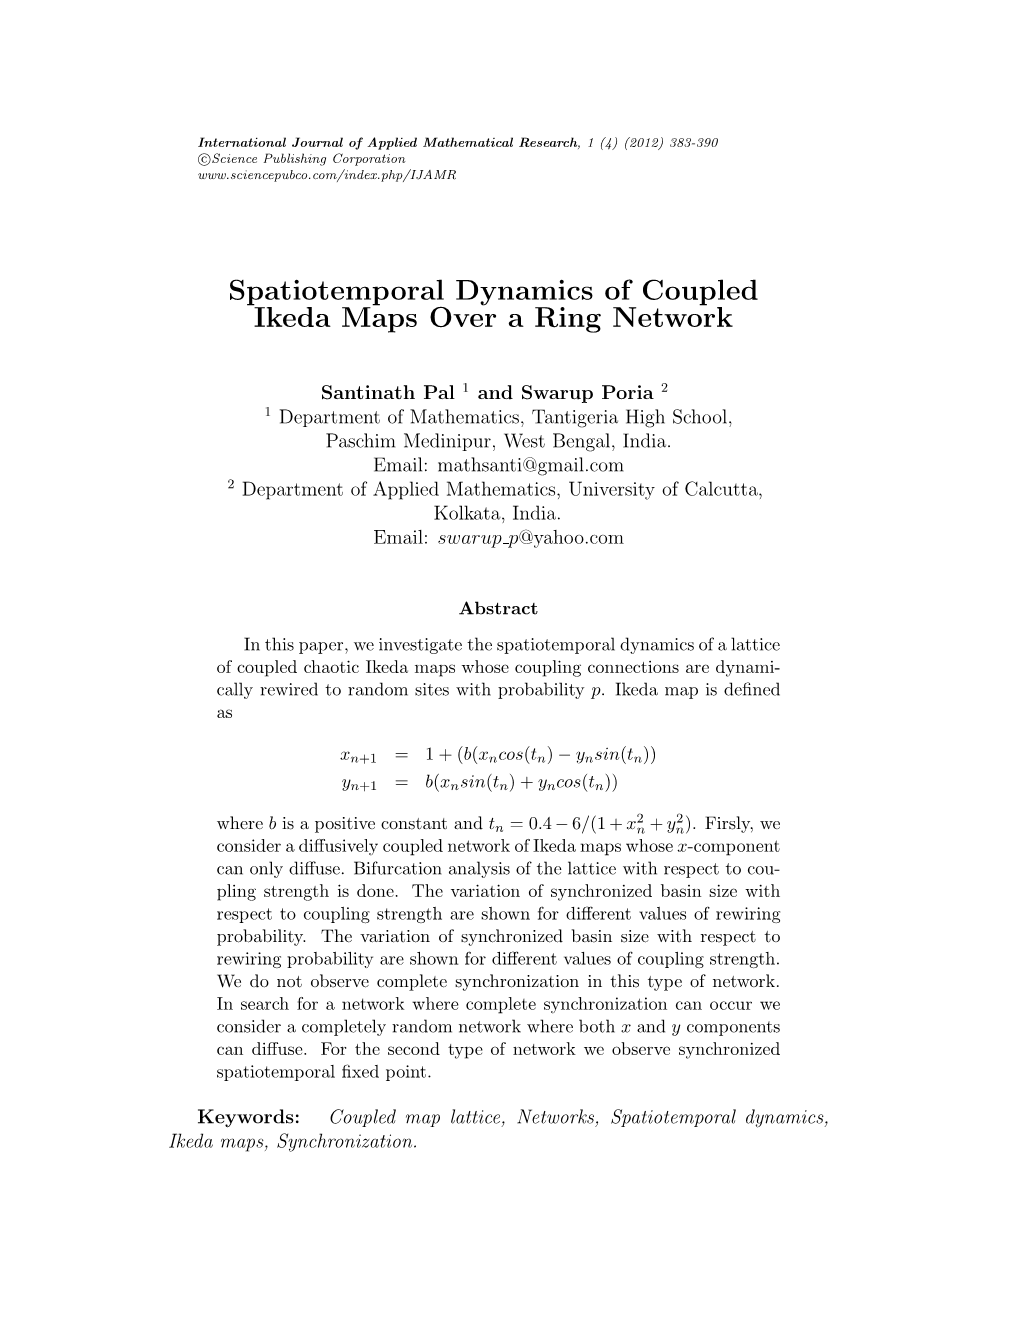 Spatiotemporal Dynamics of Coupled Ikeda Maps Over a Ring Network